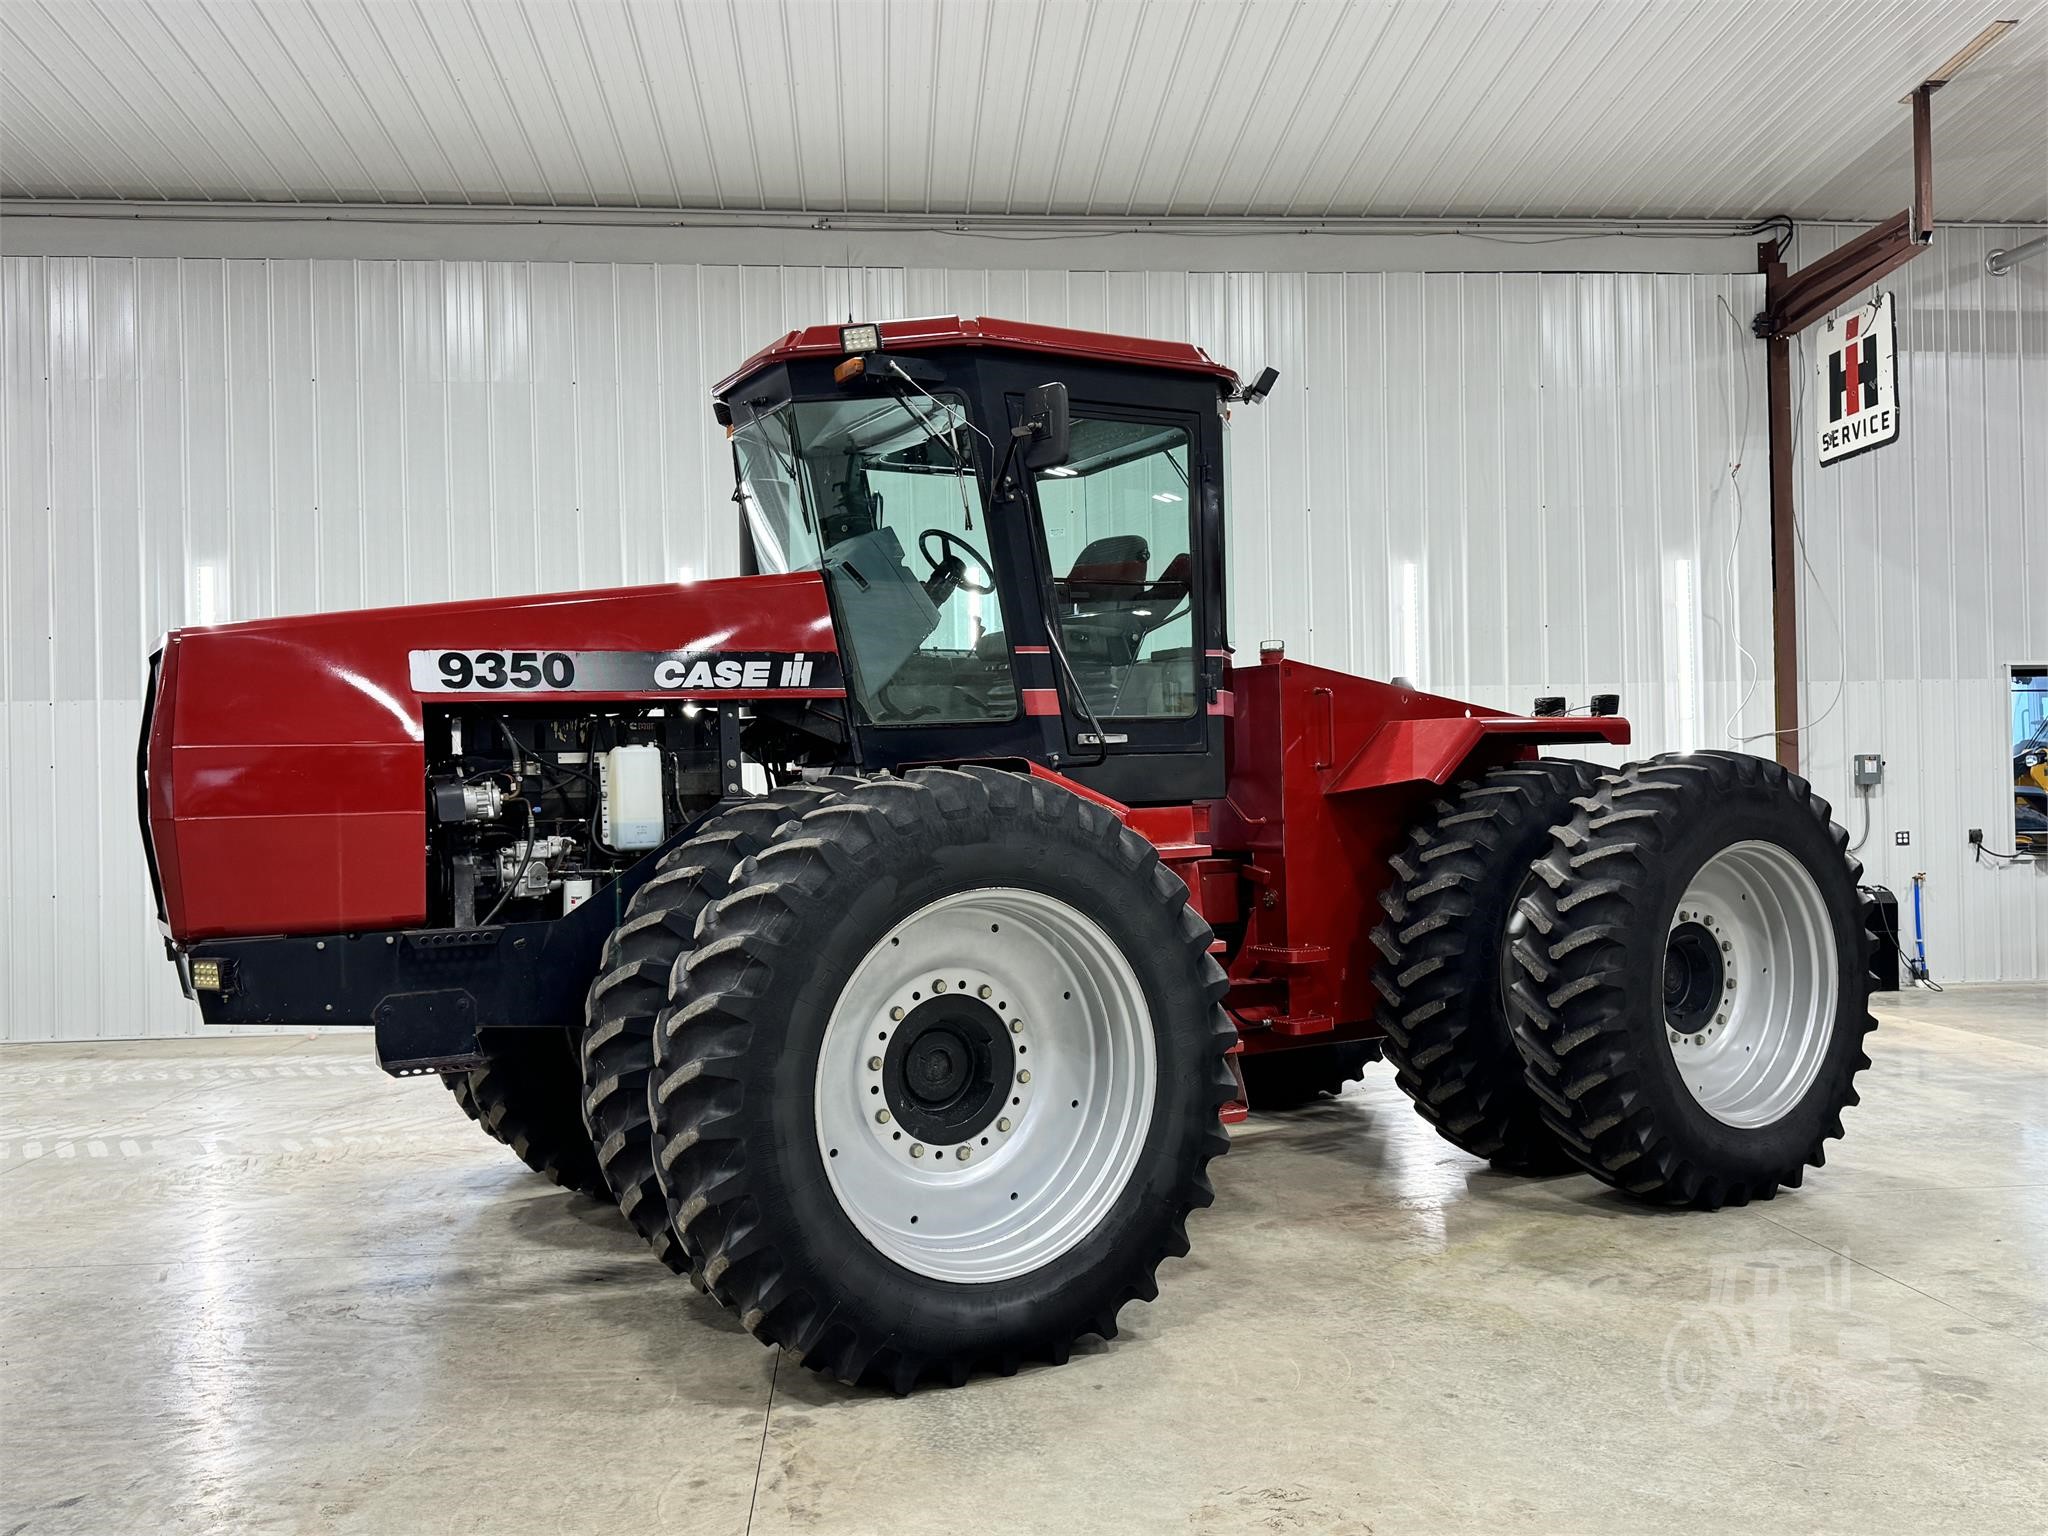 Case IH Equipment for Sale in Montana